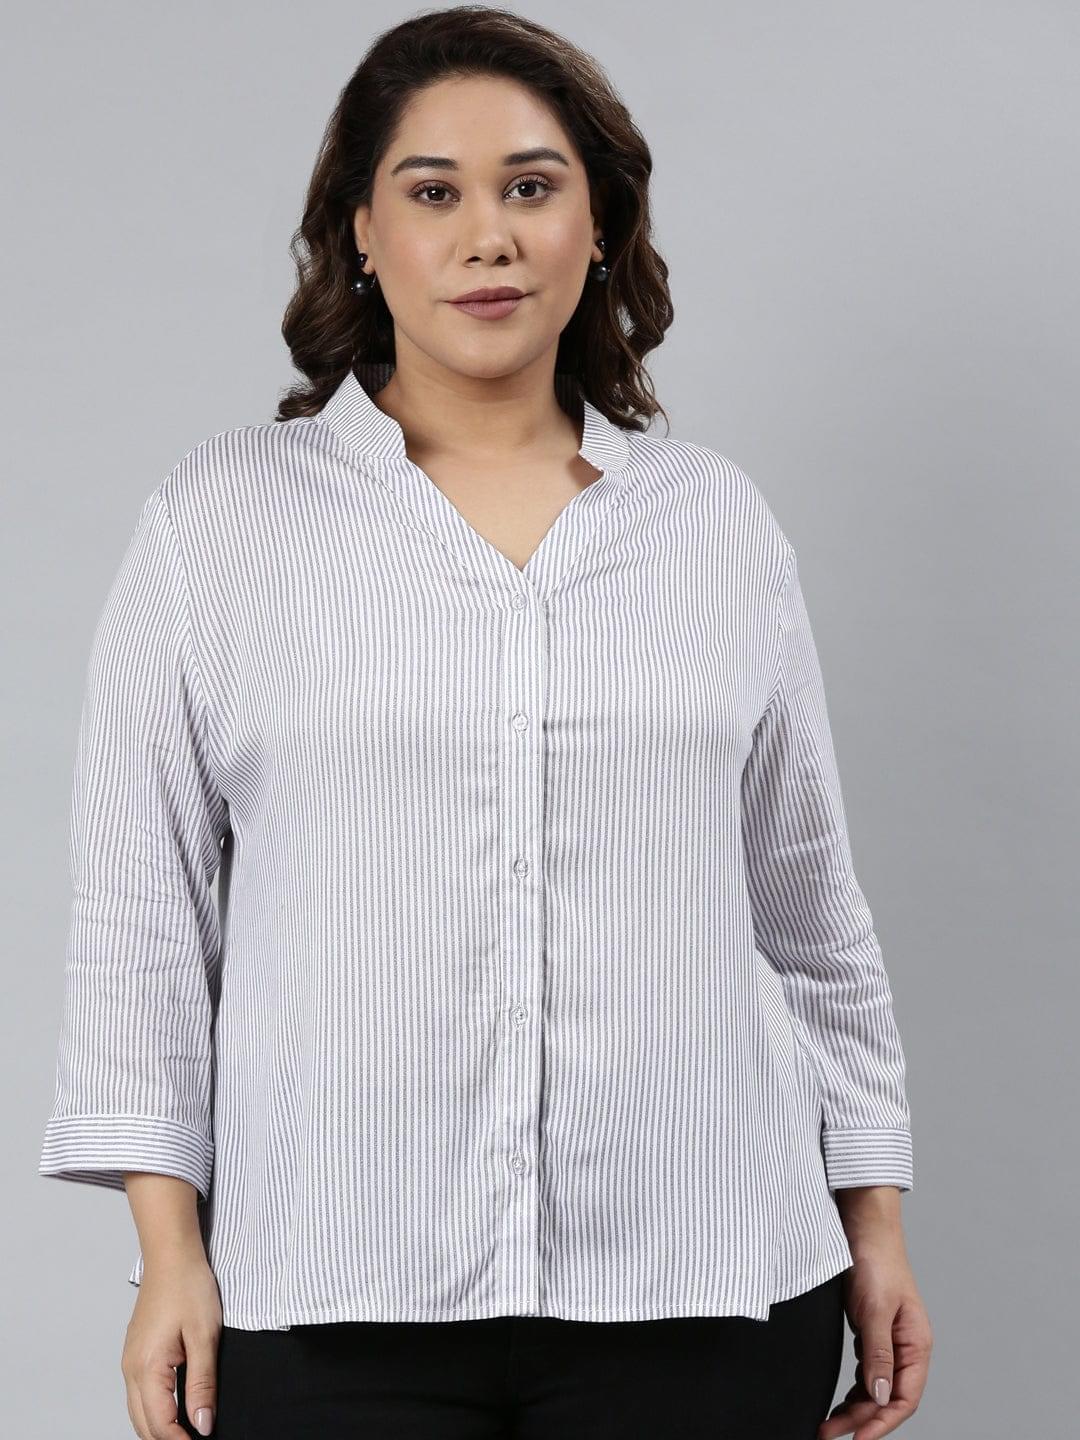 buy TheShaili shirt for women  and girls at best prices 